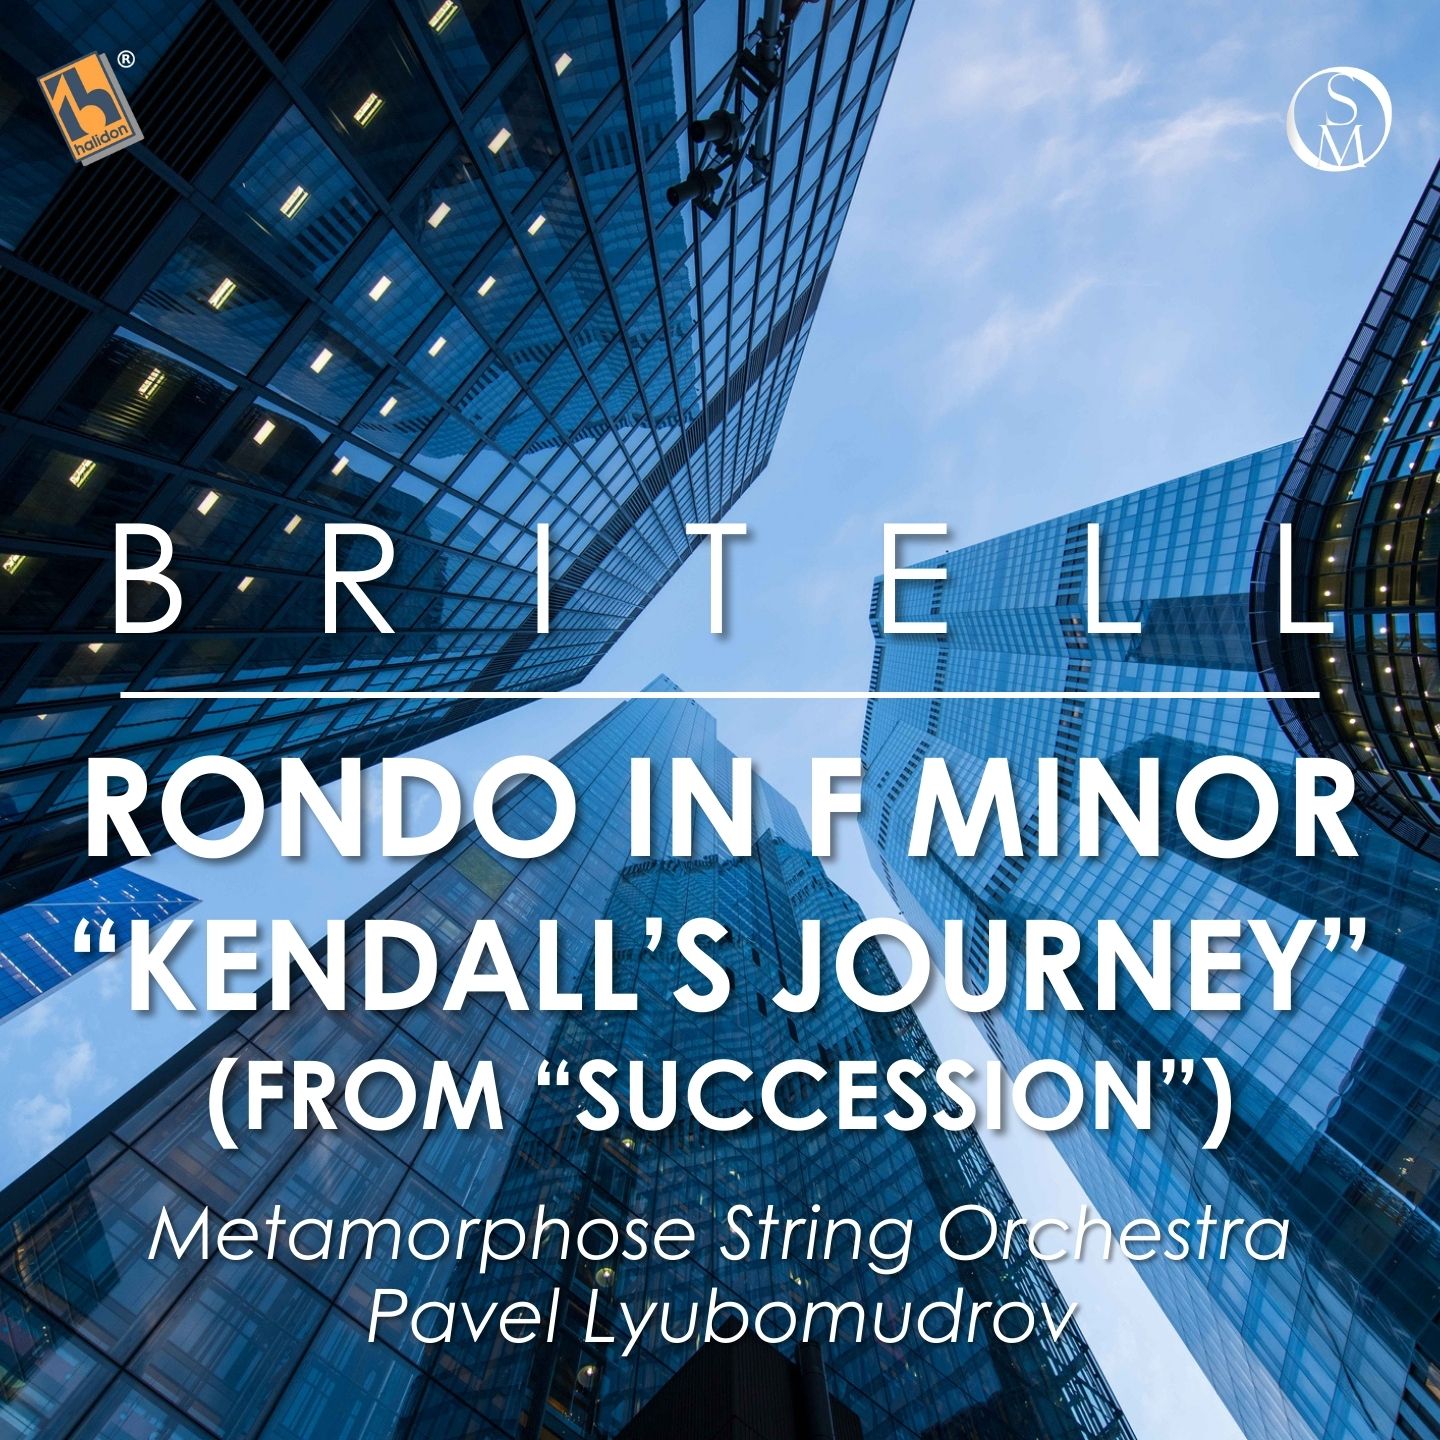 Rondo in F Minor, “Kendall’s Journey” (from “Succession”)